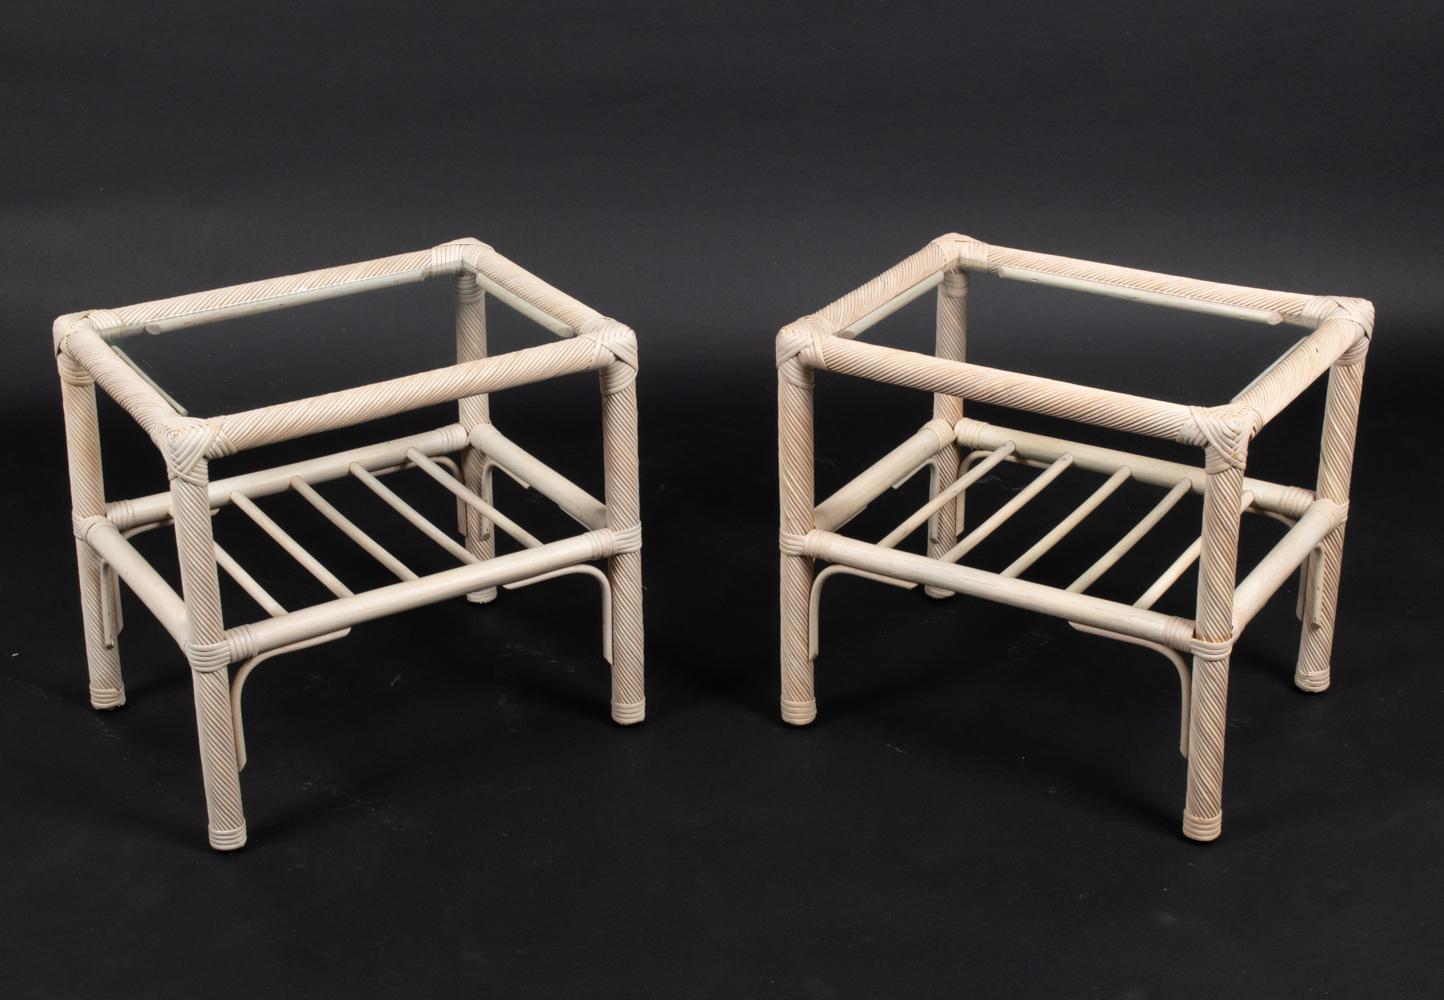 This fabulous pair of end tables features spiral-wrapped pencil reed rattan frames, with braided wicker corners and decorative braces of bent bamboo. Simple inset glass tops and a beautiful neutral eggshell paint wash allow the texture and